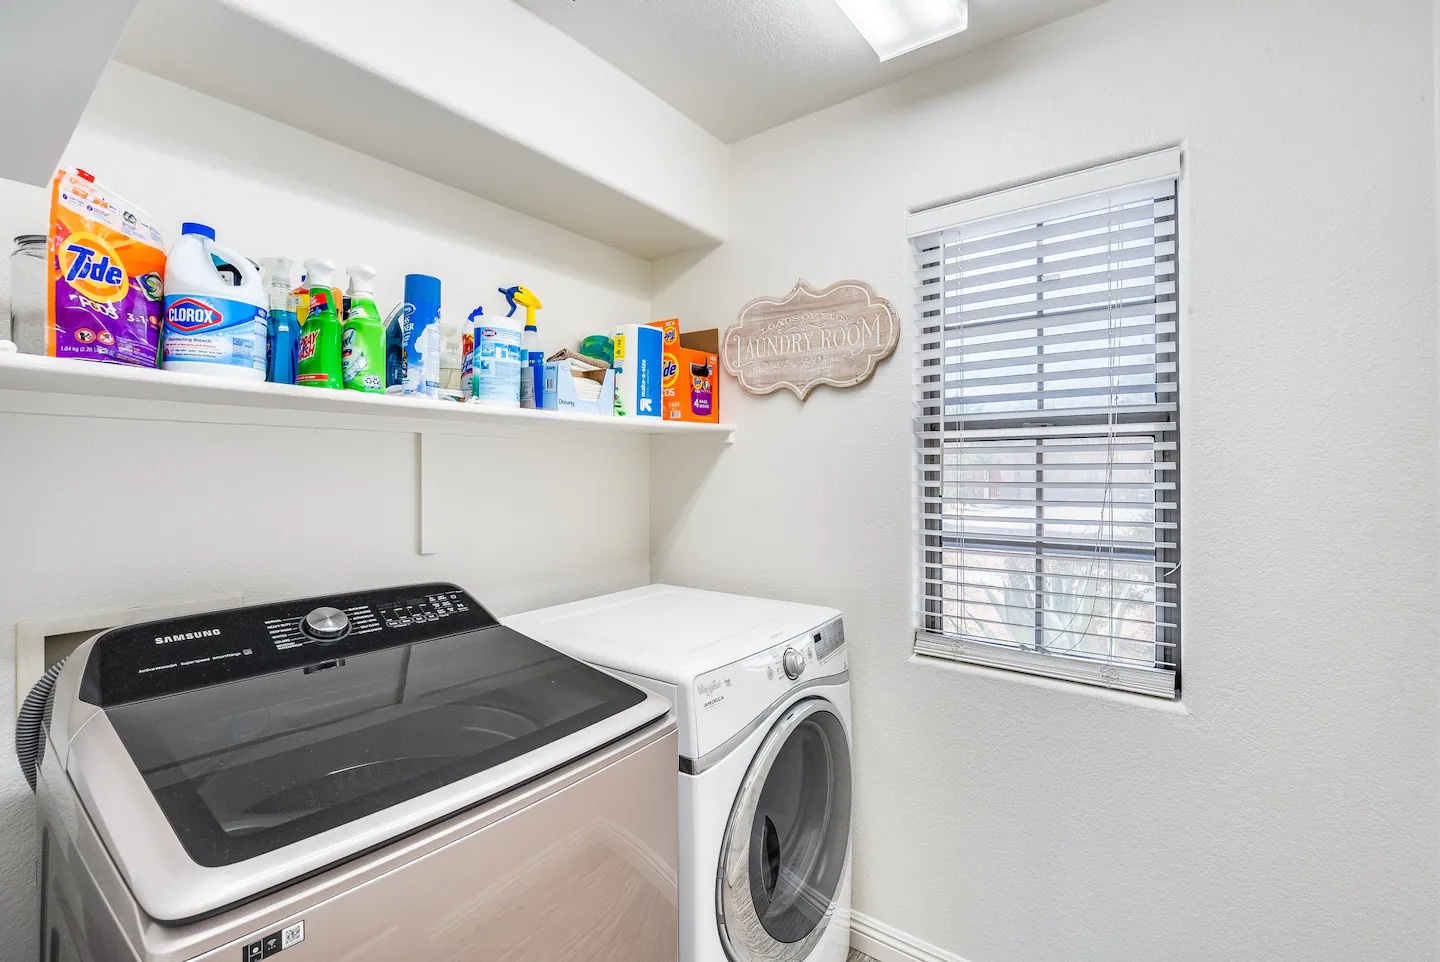 Goodyear Vacation Rentals, Foothills Sunny House - Laundry Room